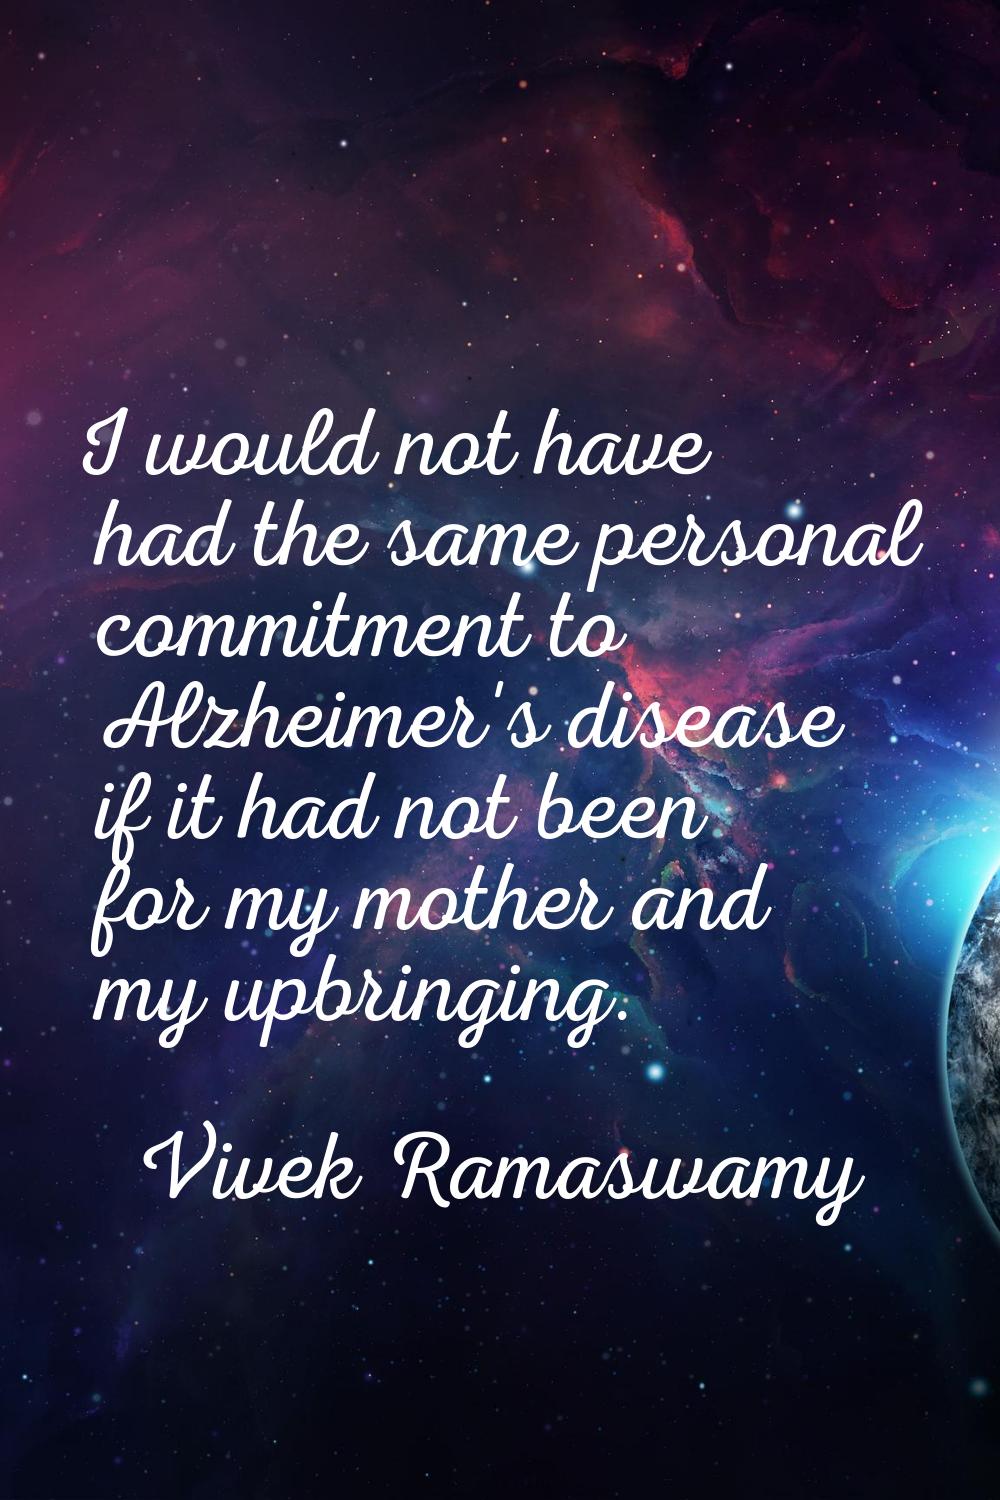 I would not have had the same personal commitment to Alzheimer's disease if it had not been for my 